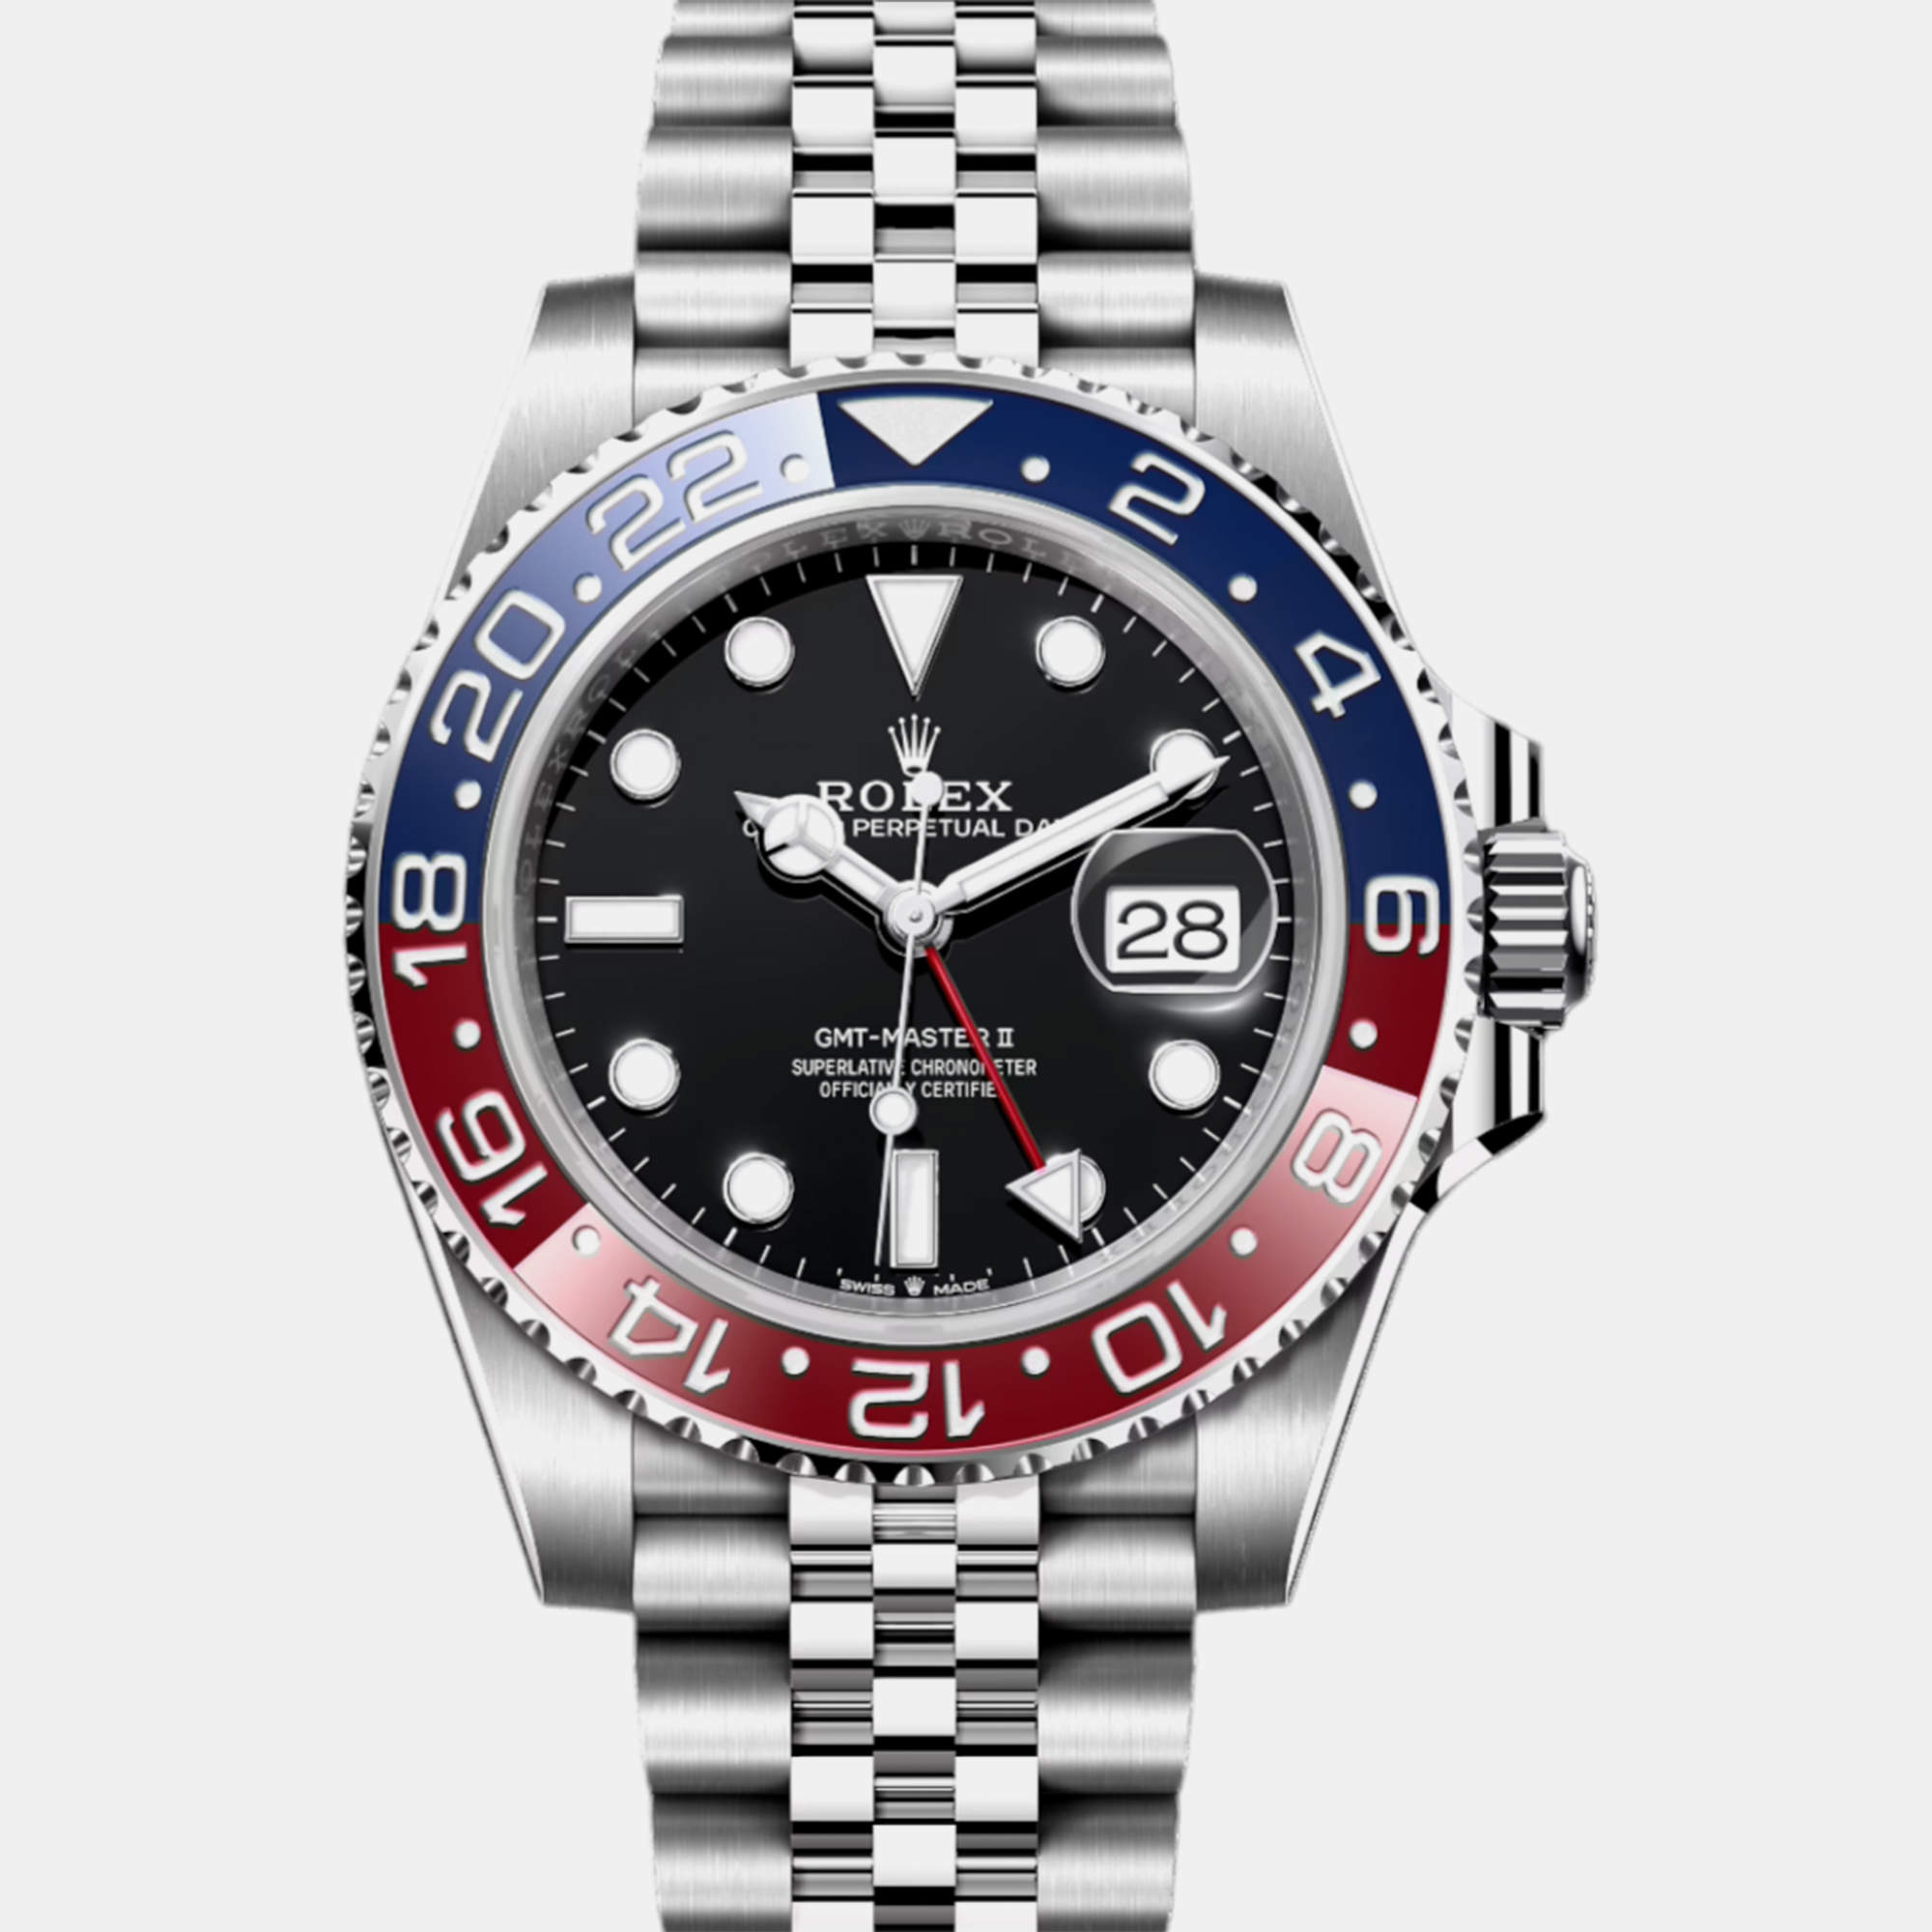 Rolex -Stainless Steel 40 black automatic GMT-Master II 126710 BLRO